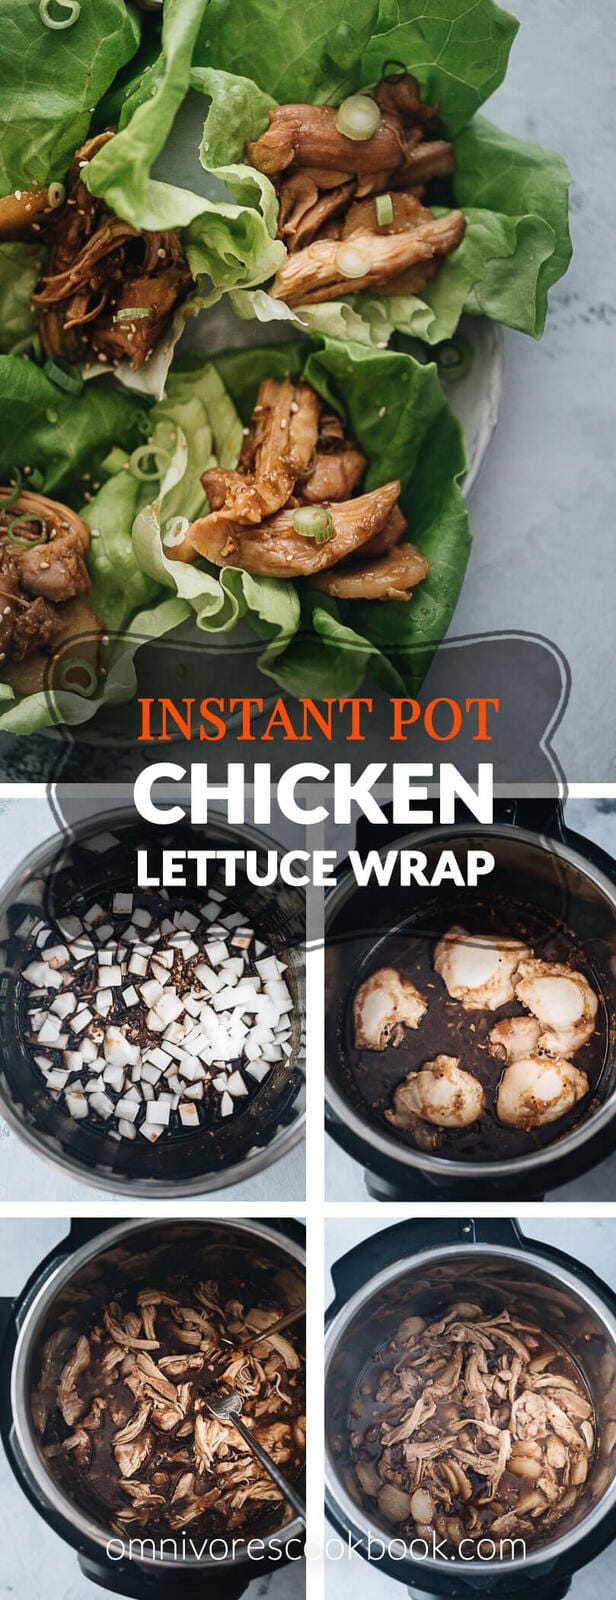 Instant Pot Shredded Chicken Lettuce Wrap - Tender, juicy chicken is smothered in a savory brown sauce with crisp water chestnuts. It takes no time to prepare and is so fast to make, which makes it a perfect easy and healthy dish for your weekday dinner. #asian #lowcarb #recipe #chinese